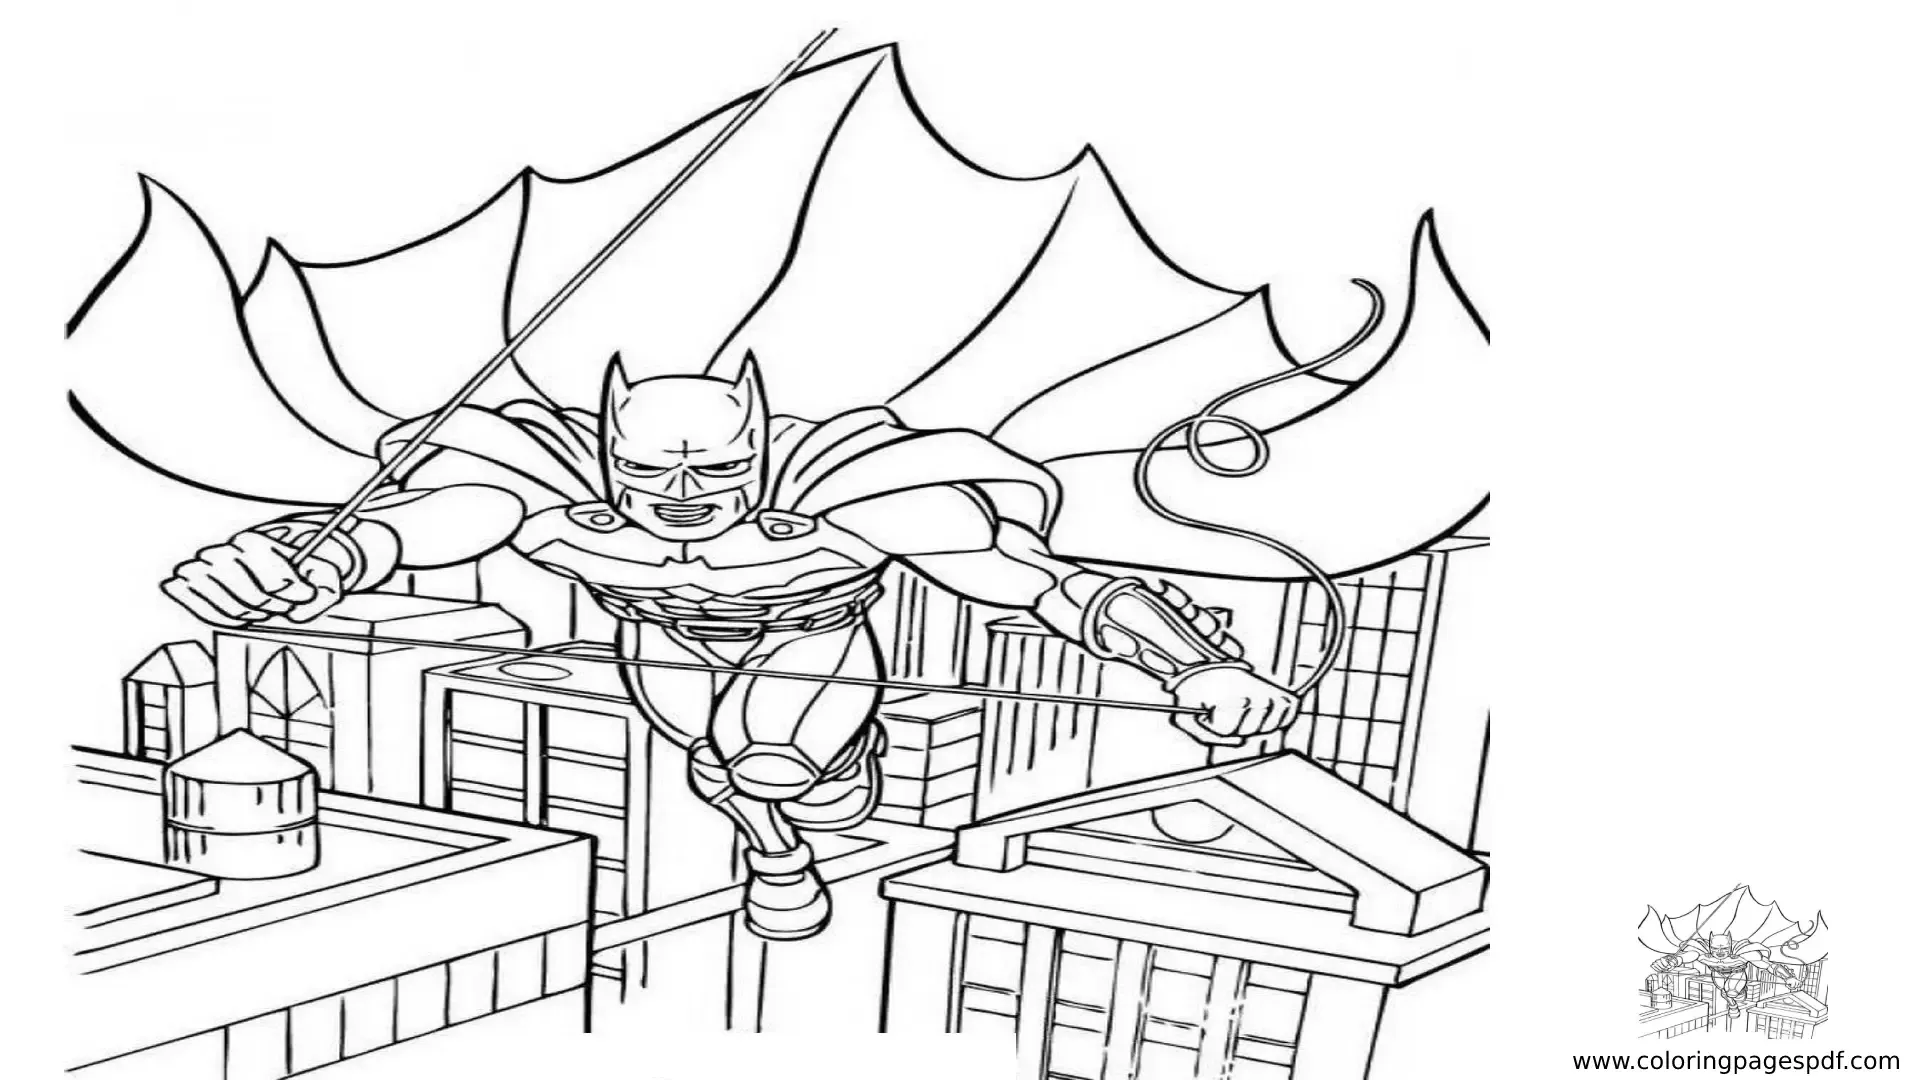 Coloring Pages Of Batman Rope Swinging